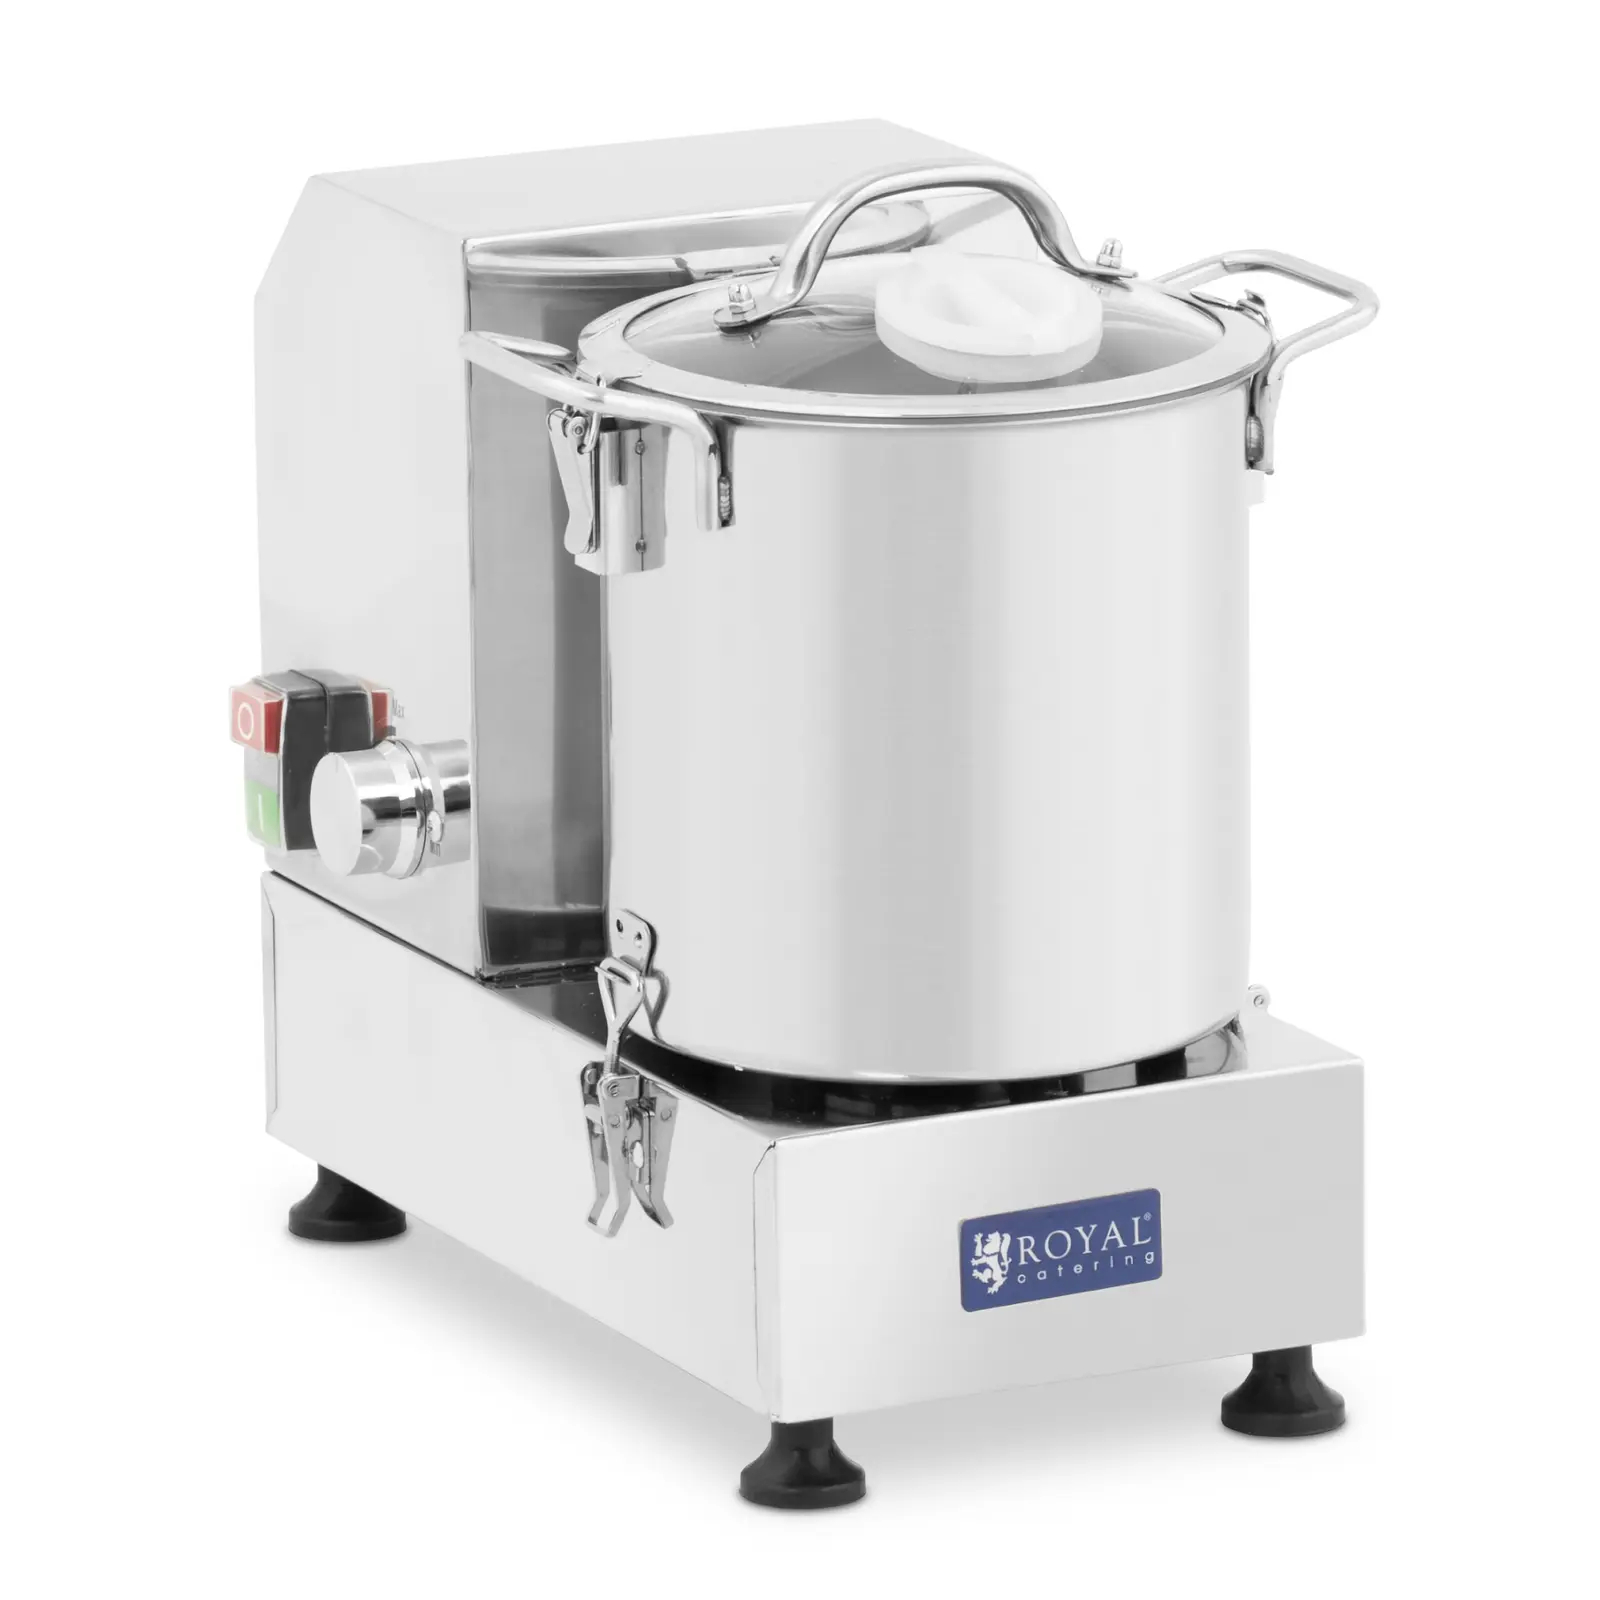 Foodprosessor- 1600 - 3200 rpm - 6 l - Royal Catering